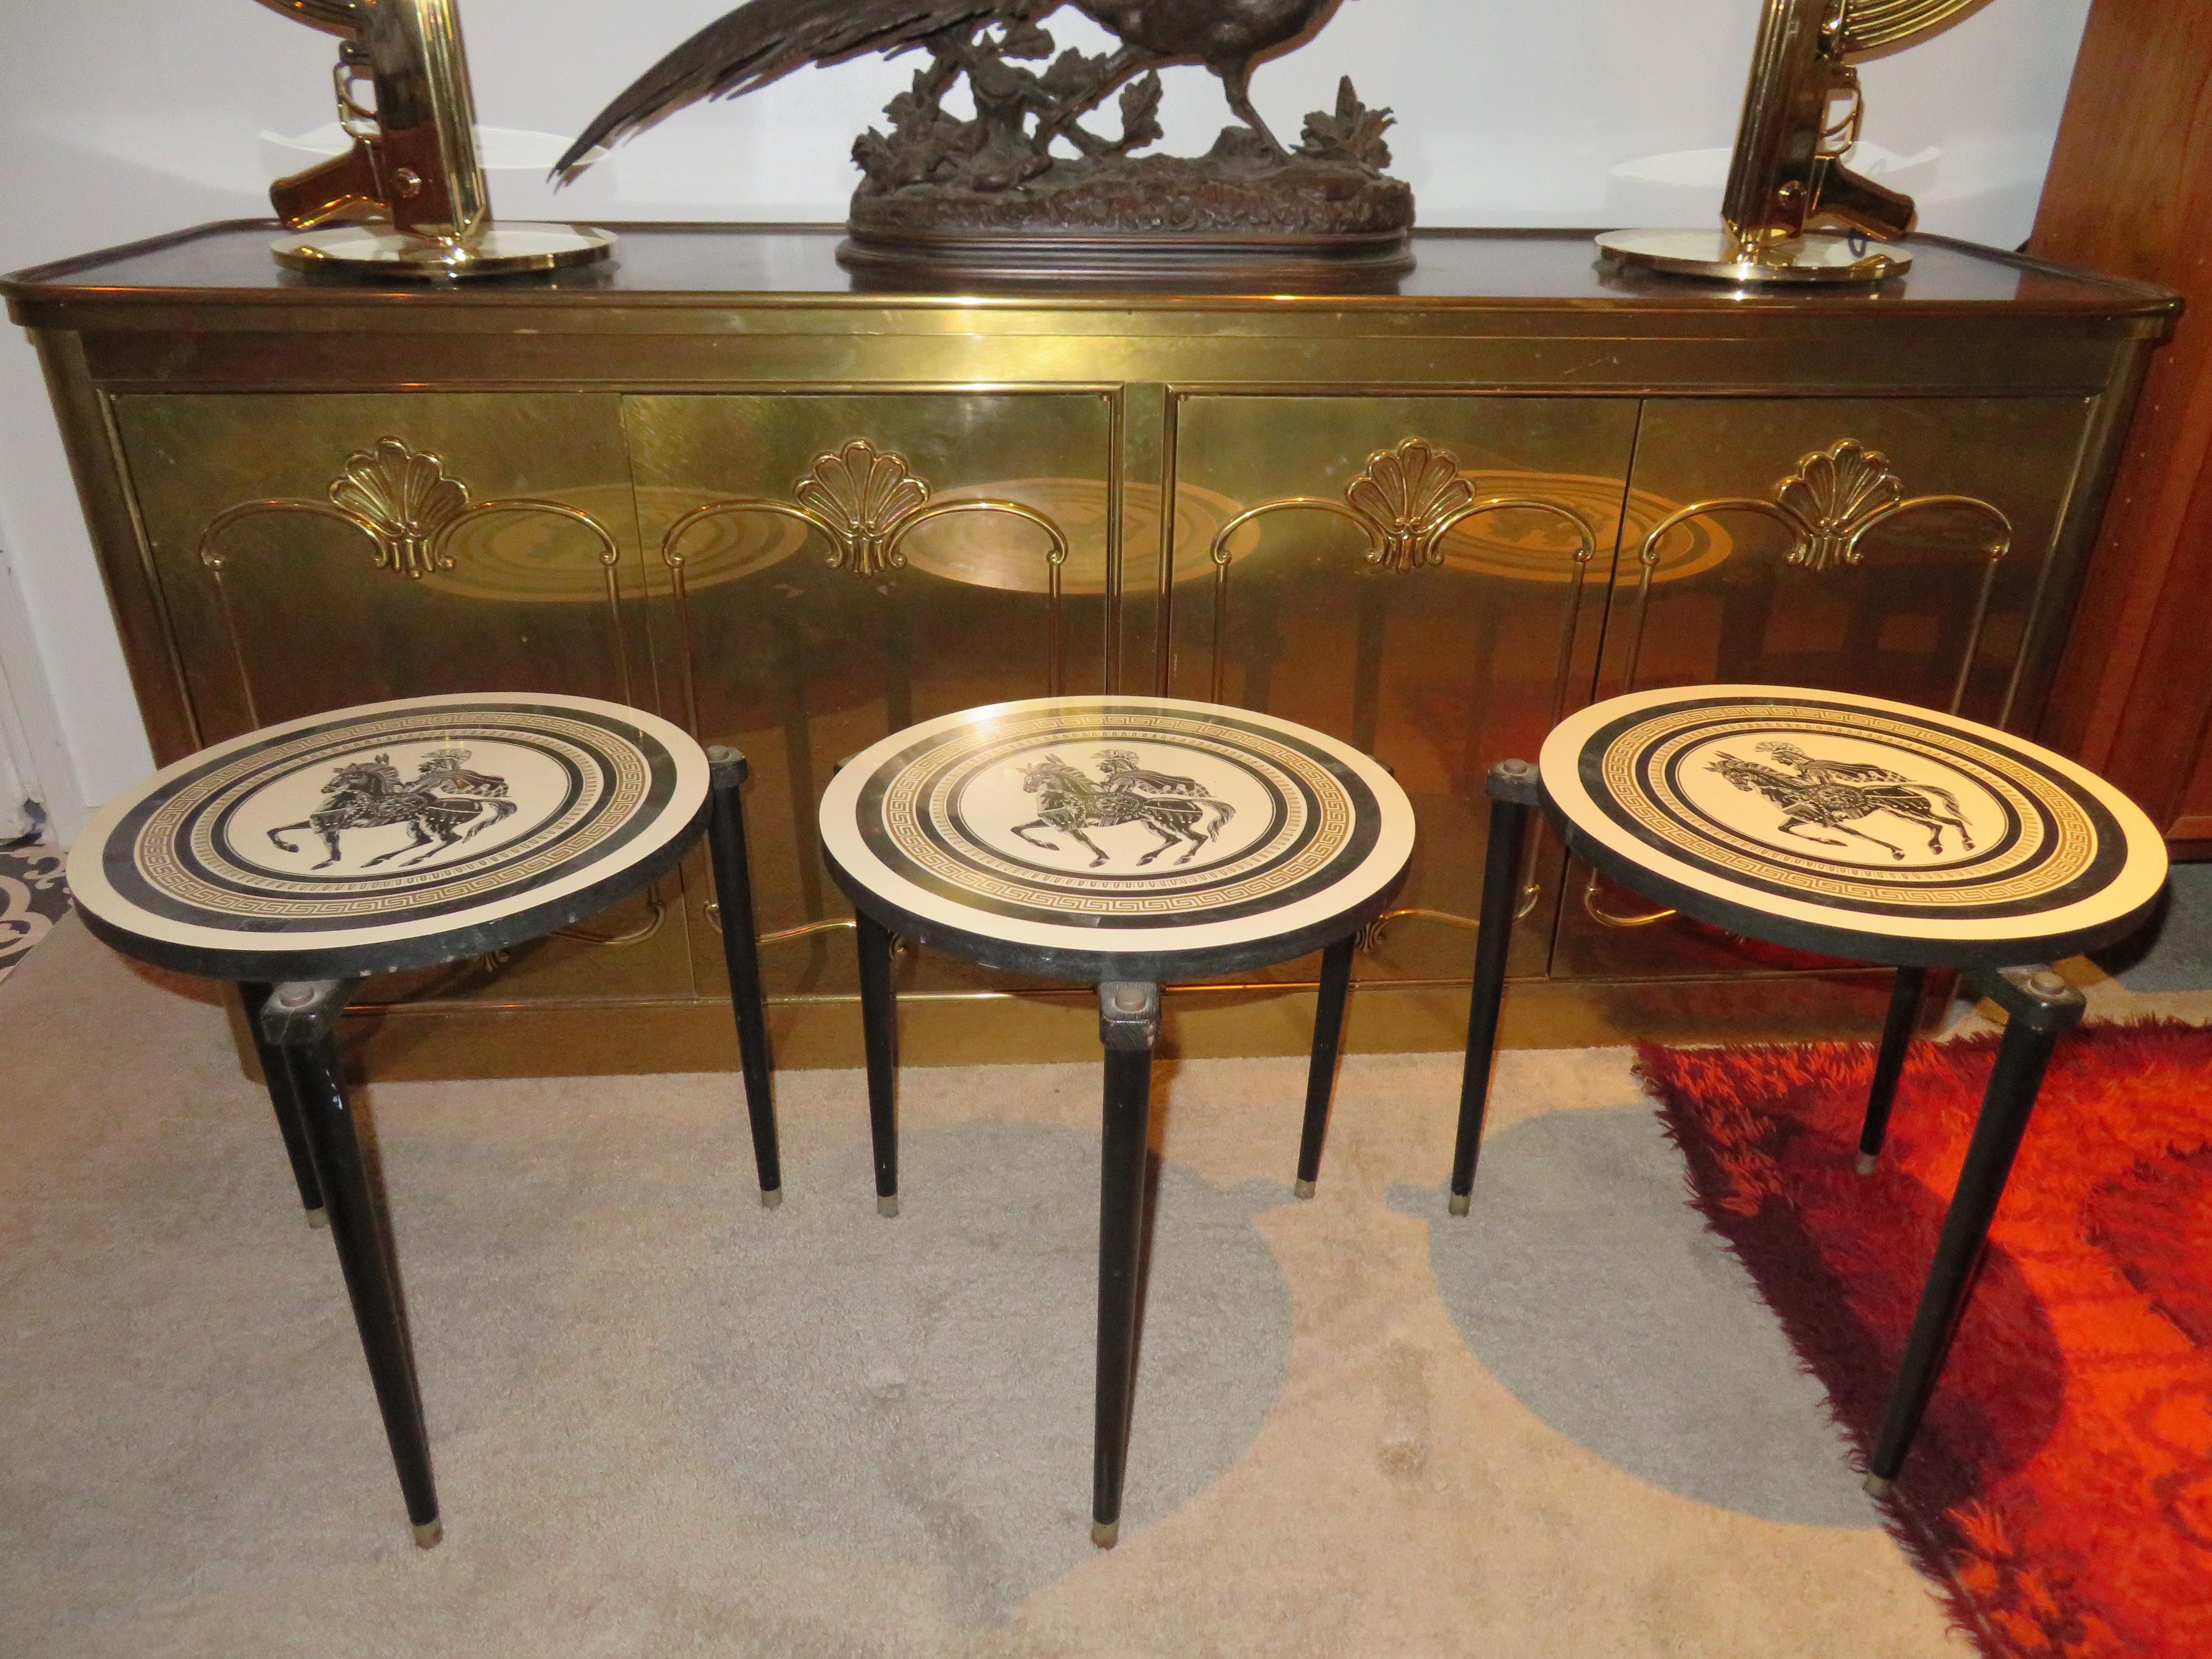 Charming set of 3 Piero Fornasetti style stack nesting tables. The formica table tops each have a stylized Greek soldier on horseback with Greek key borders. Each table measures 17.5